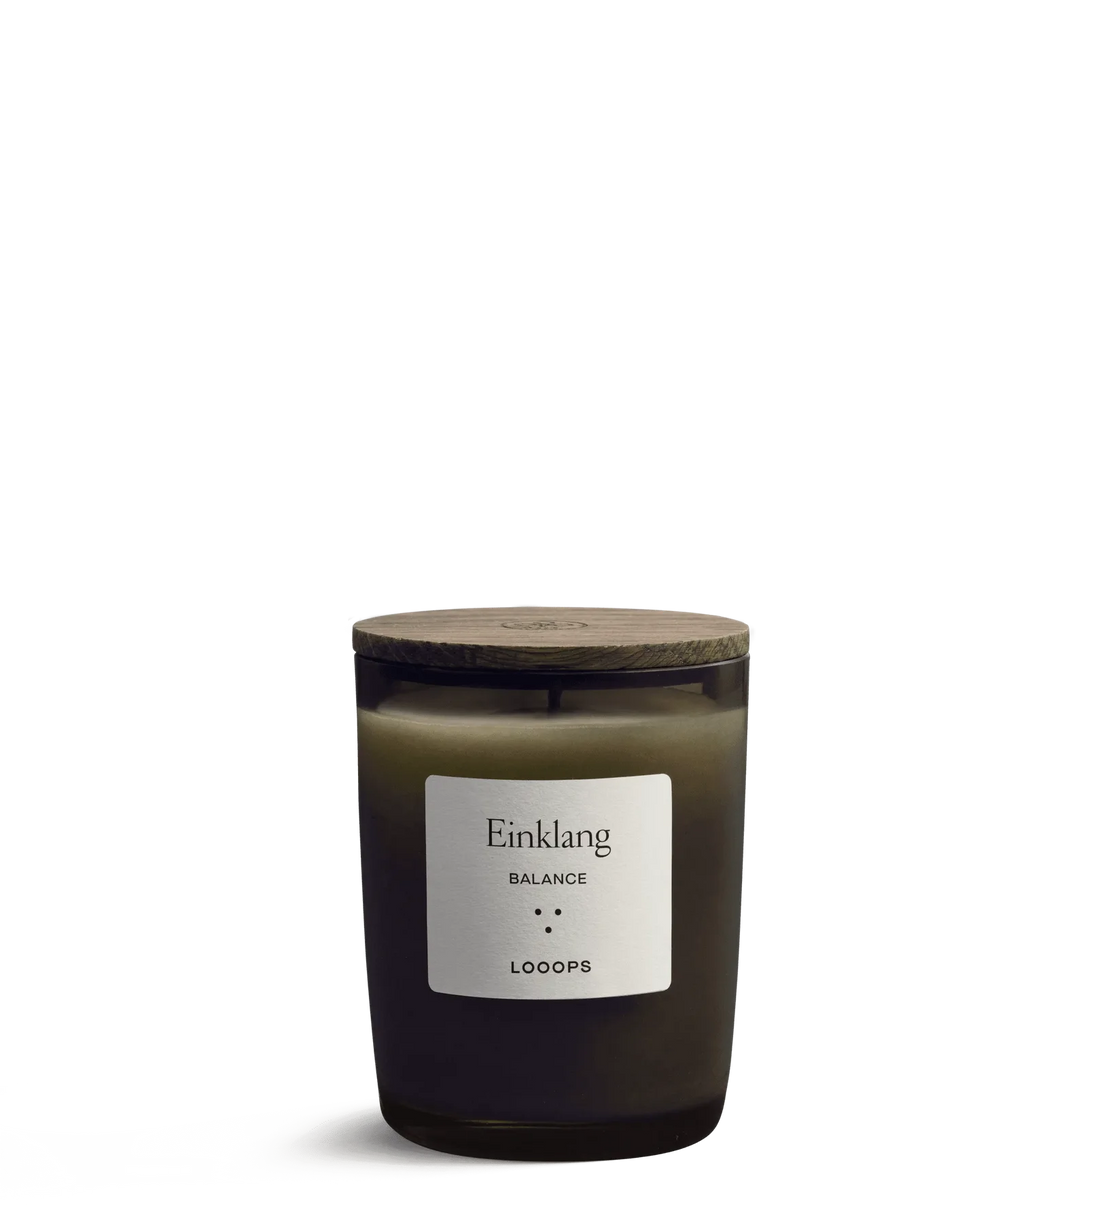 Einklang scented candle 75 g